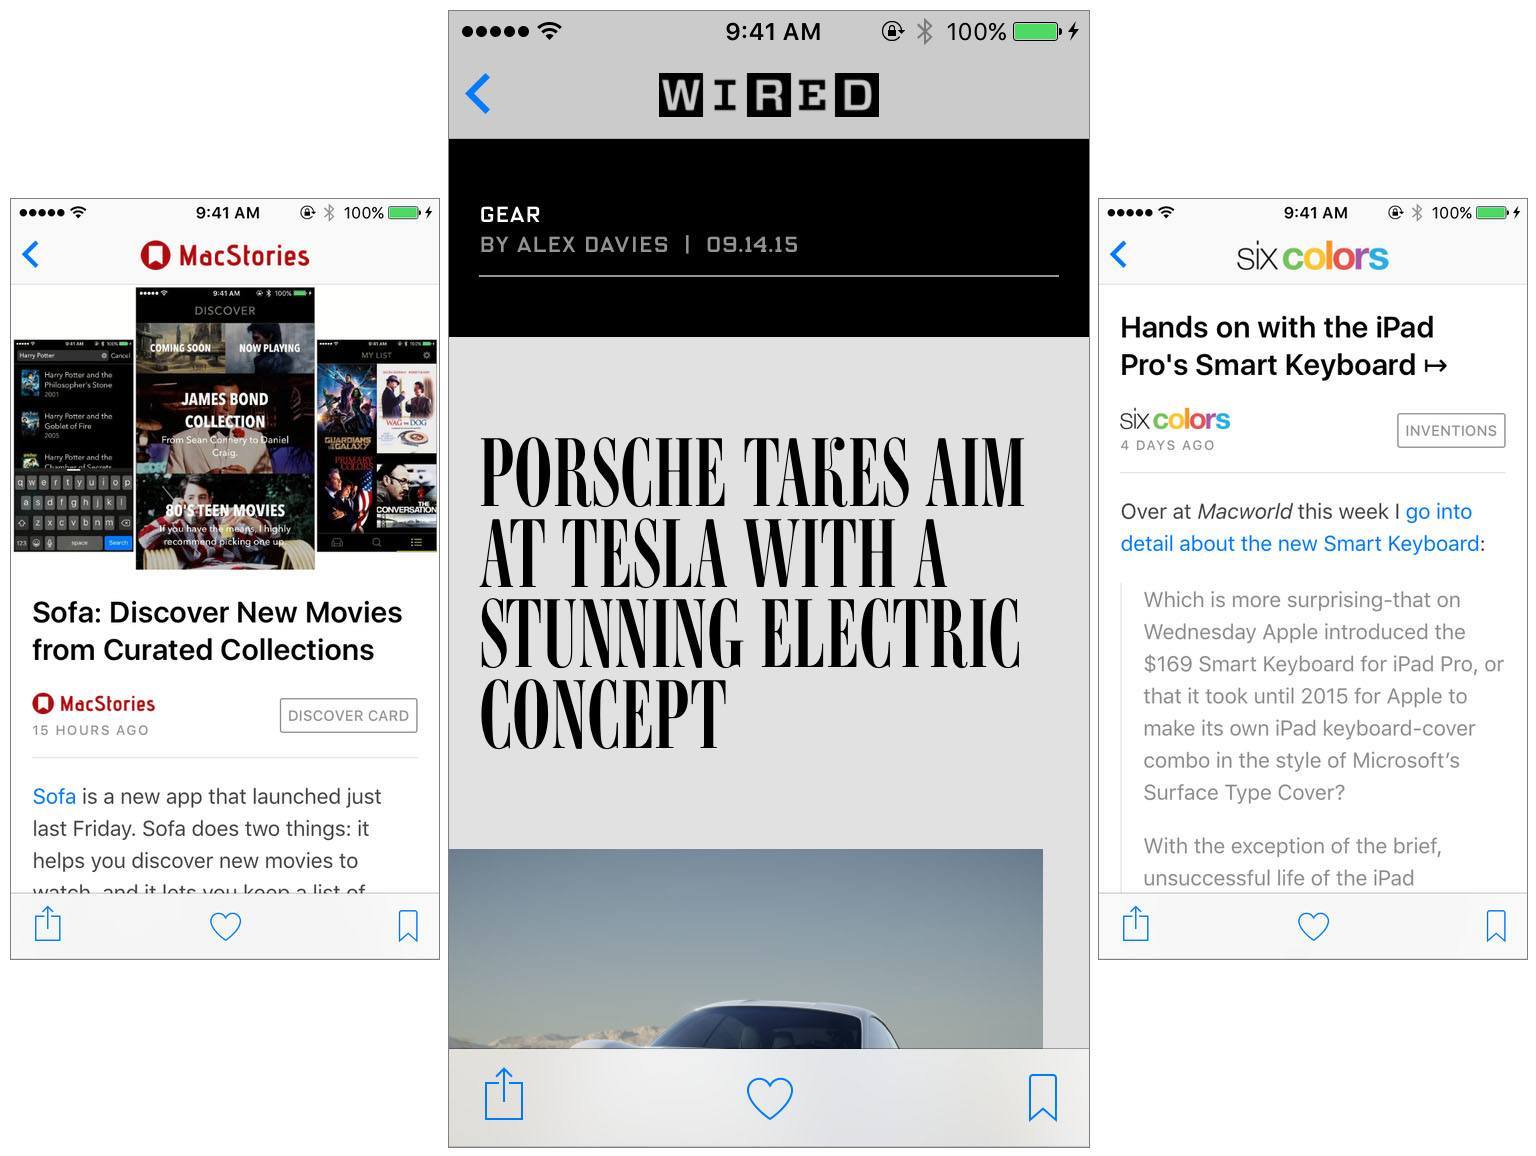 What it looks like to read a MacStories, Wired and Six Colors article in Apple News. Wired looks so unique because they are able to publish stories using the Apple News Format.